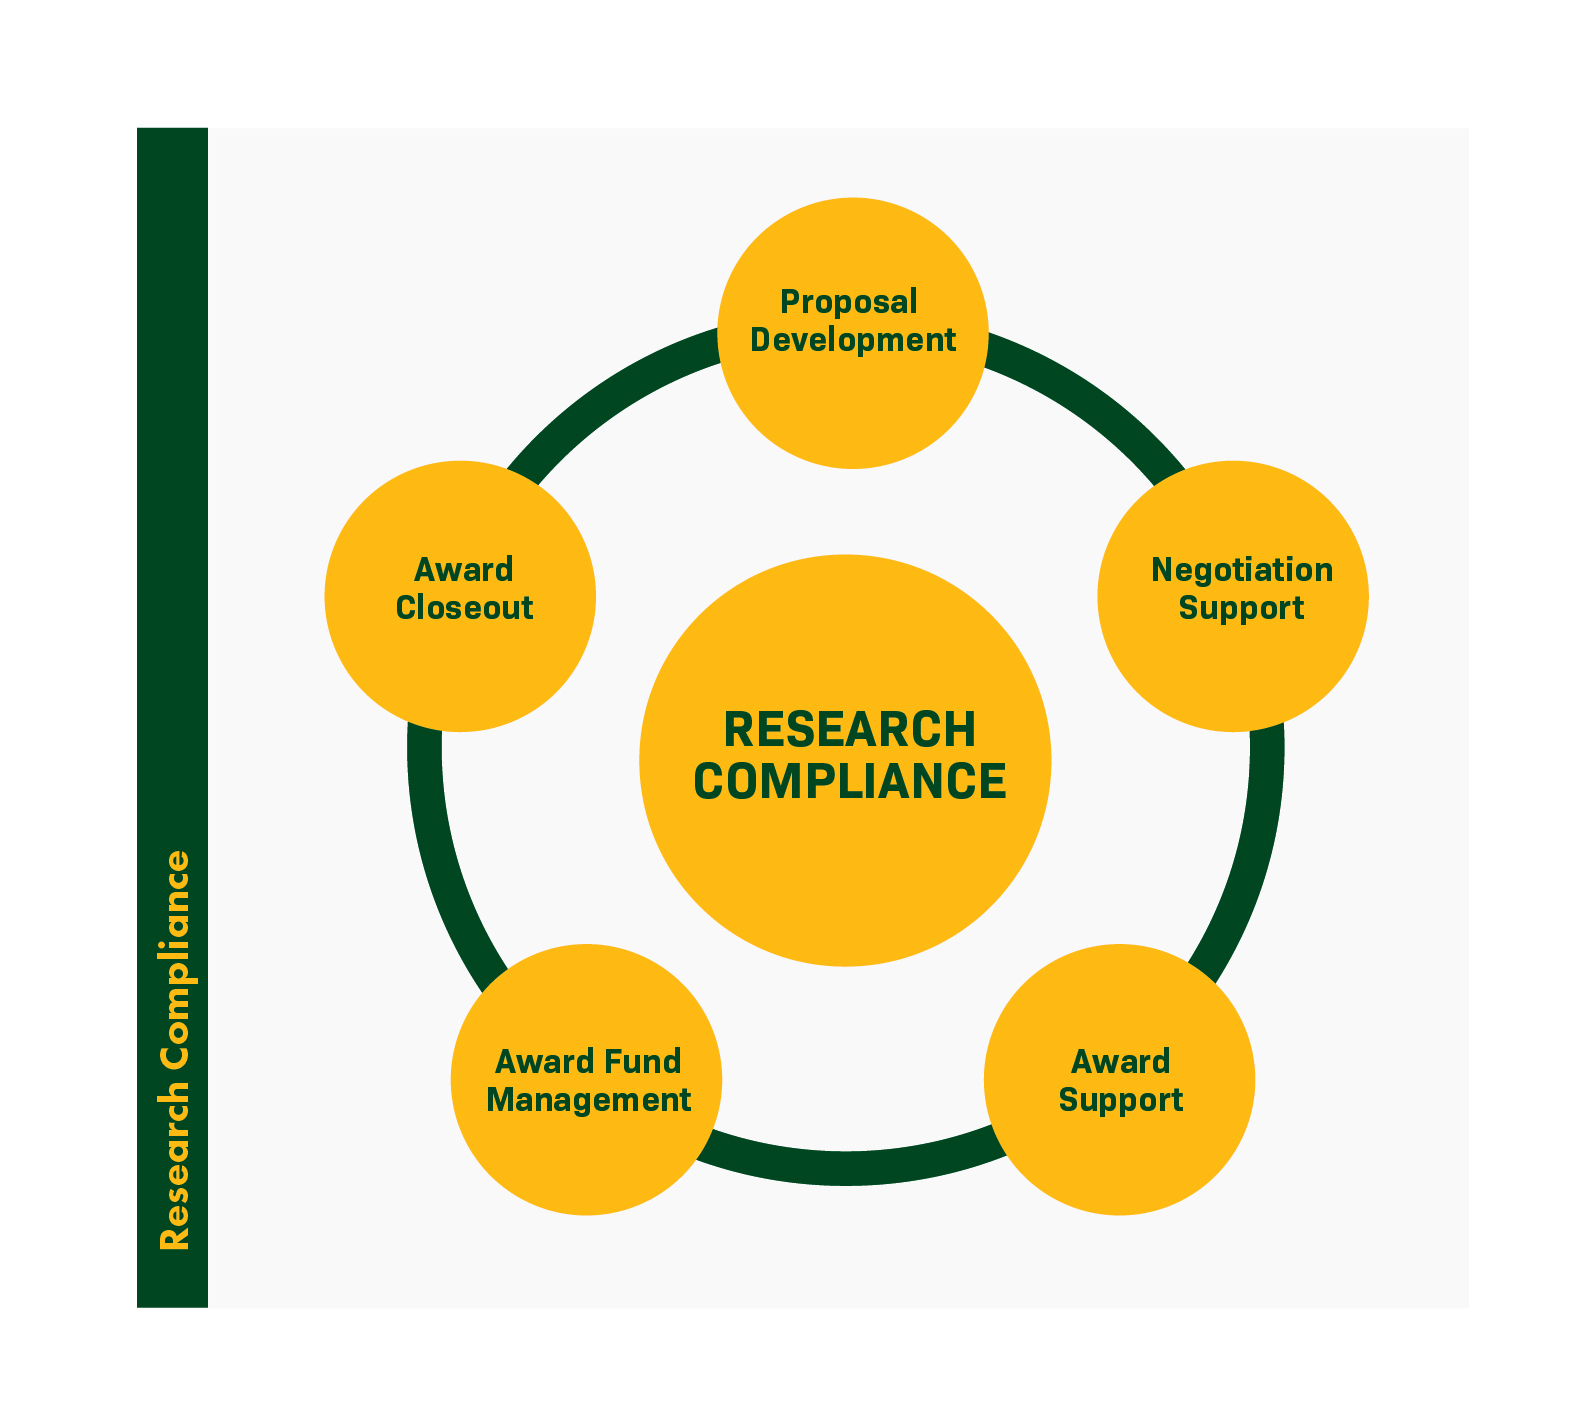 Illustration of Research Compliance